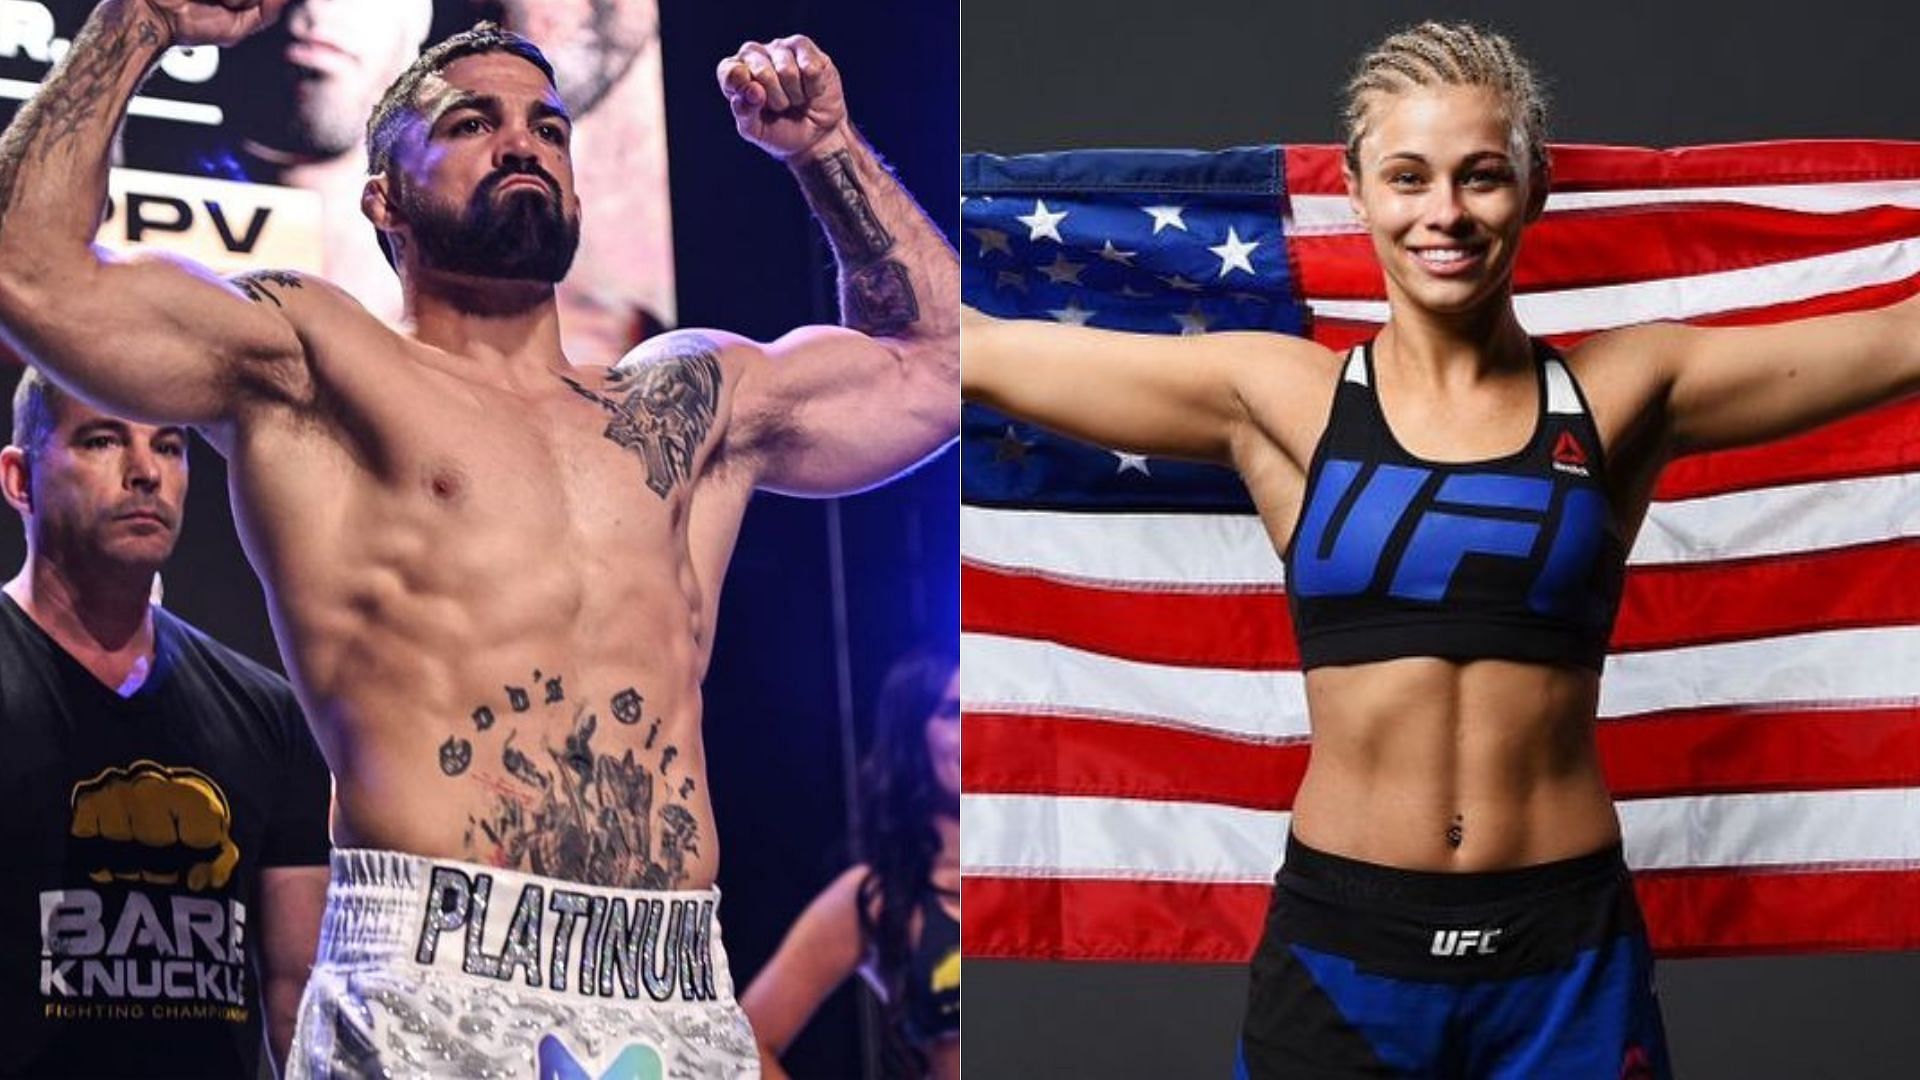 Mike Perry (left) Paige VanZant (right) [Image courtesy @platinummikeperry @paigevanzant on Instagram]